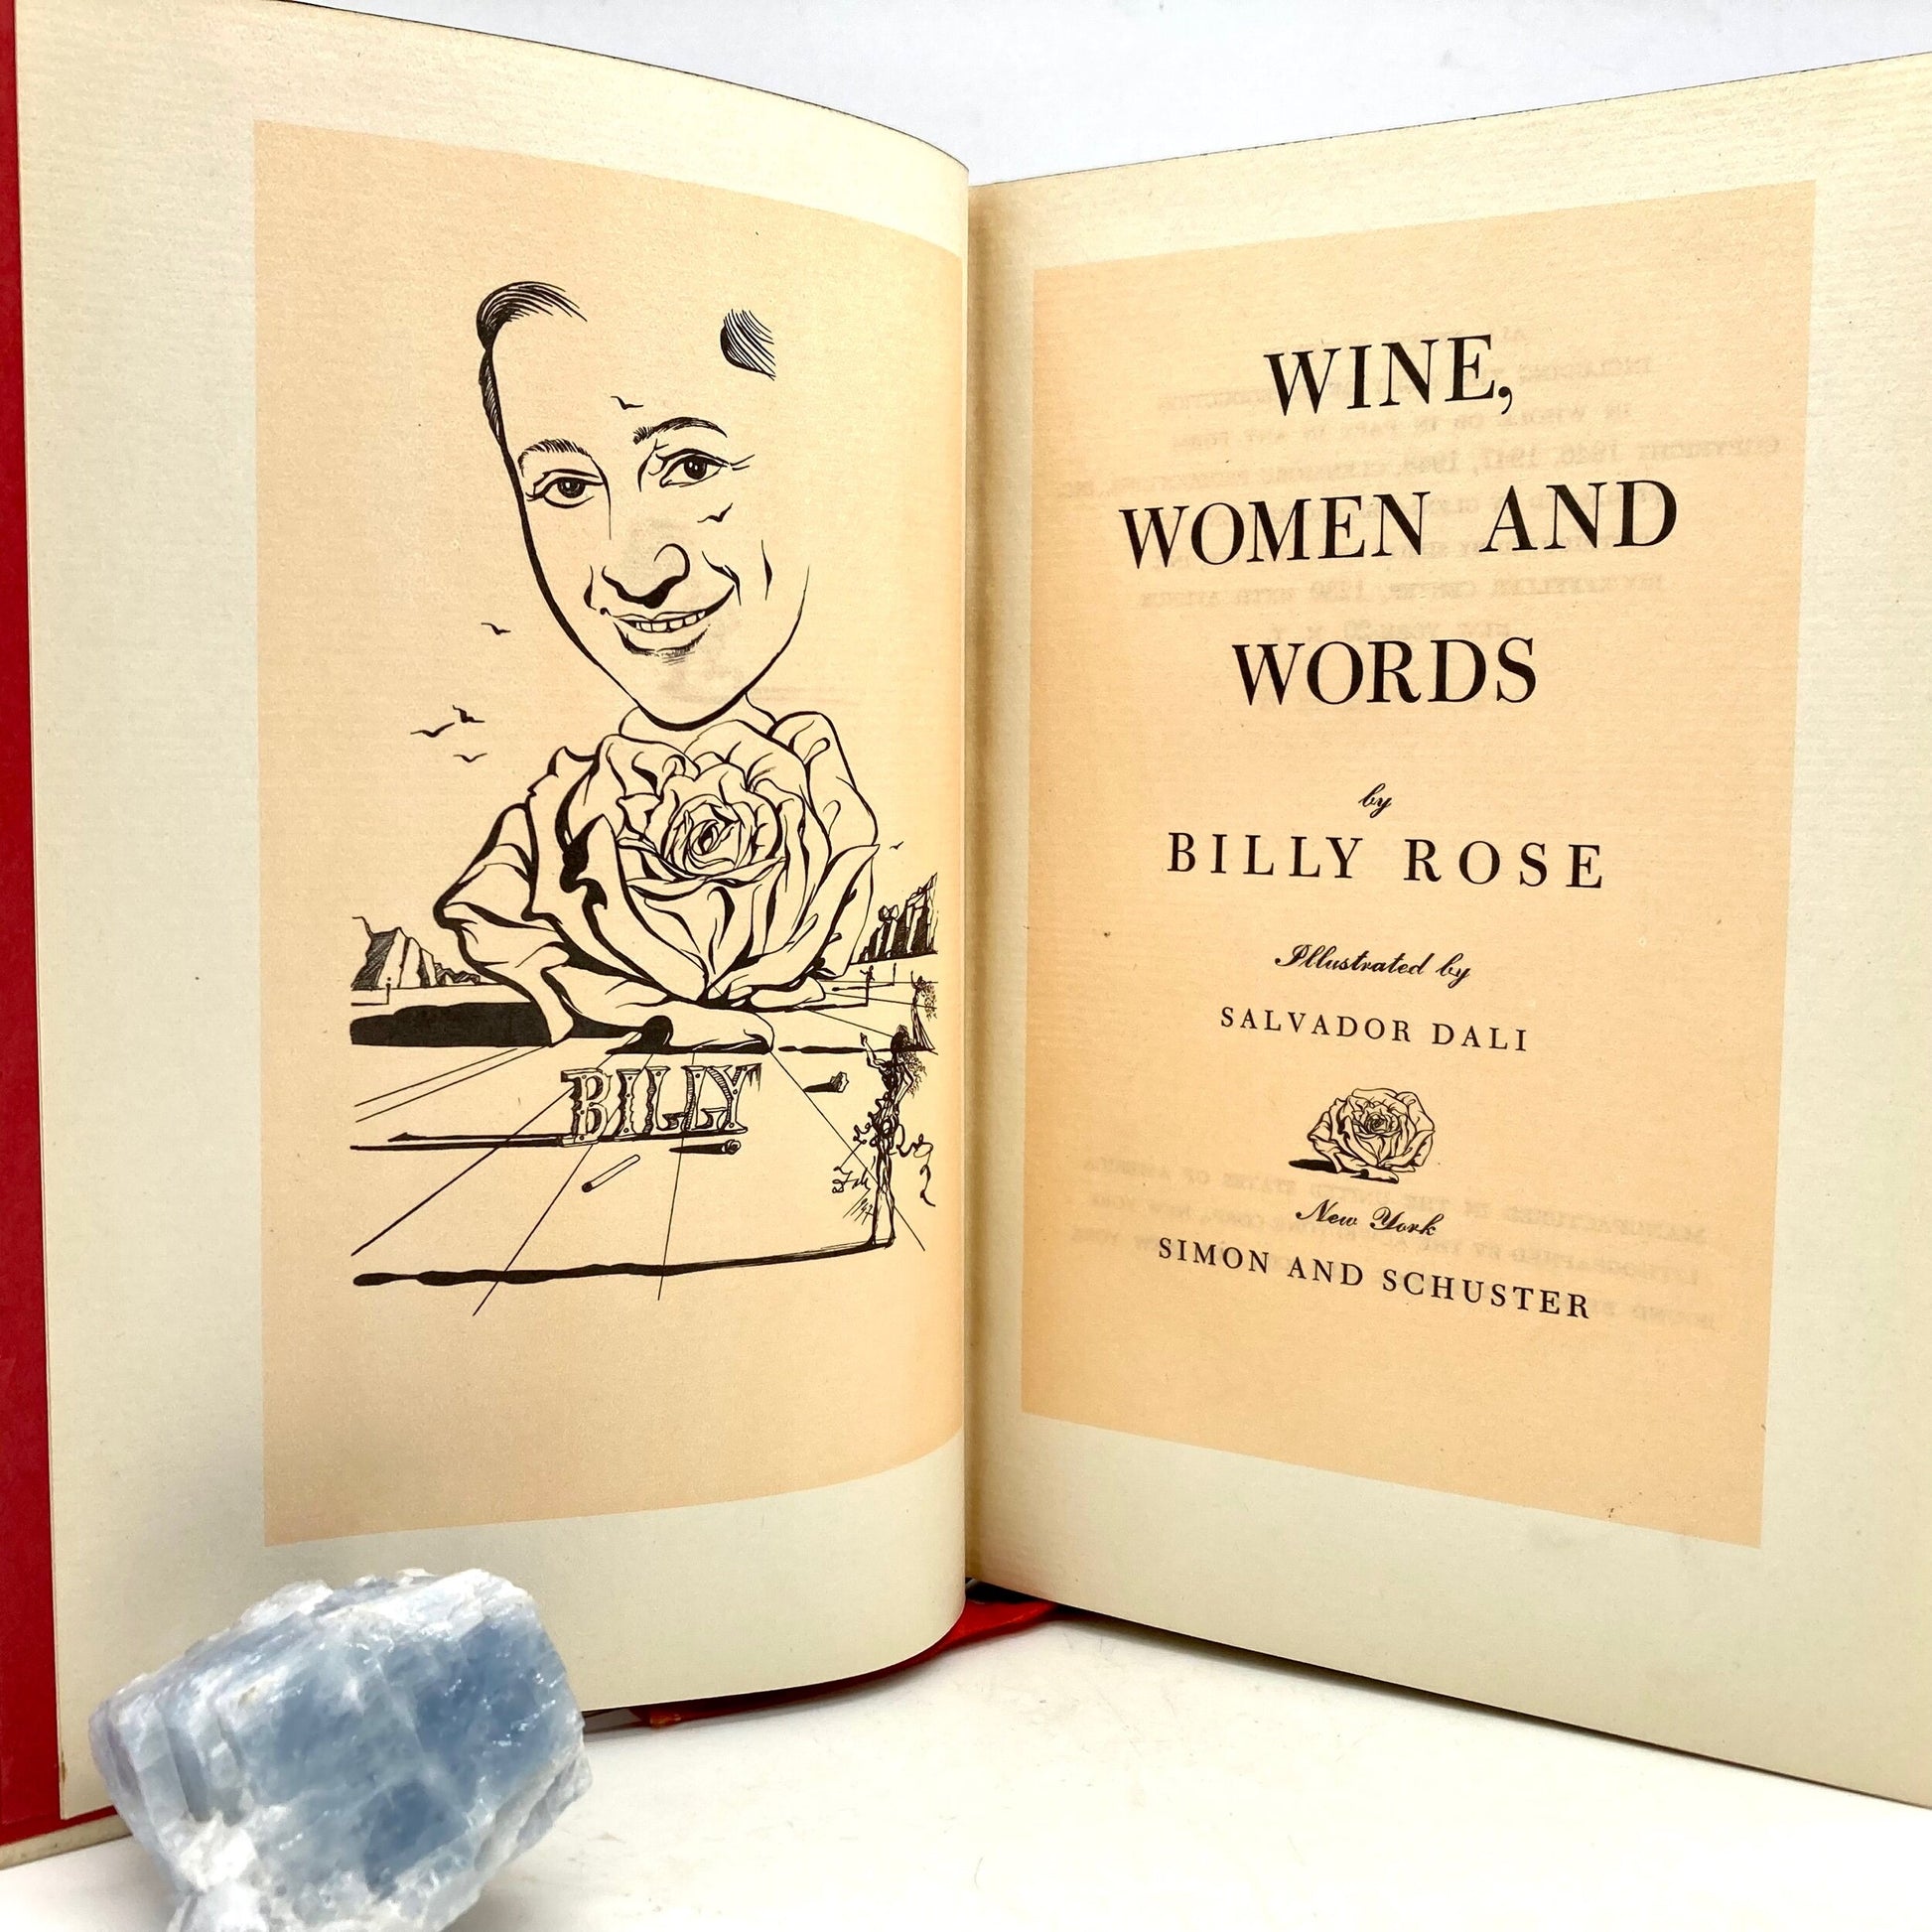 ROSE, Billy "Wine, Women and Words" [Simon and Schuster, 1948] (Signed + Henry Miller Inscription) - Buzz Bookstore